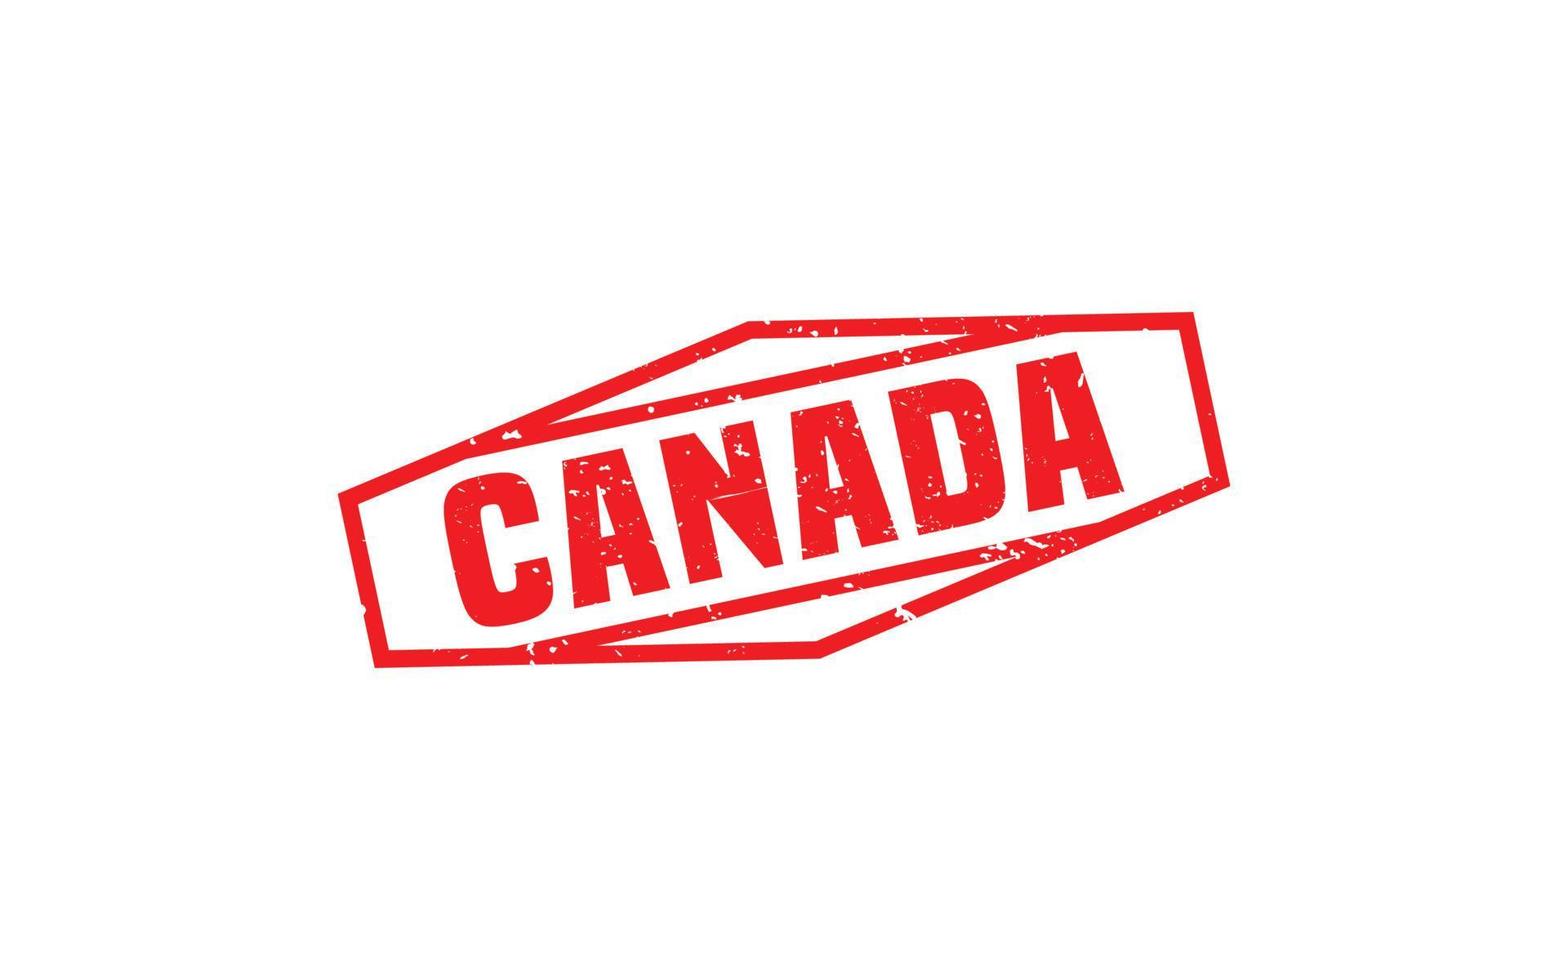 Canada stamp rubber with grunge style on white background vector